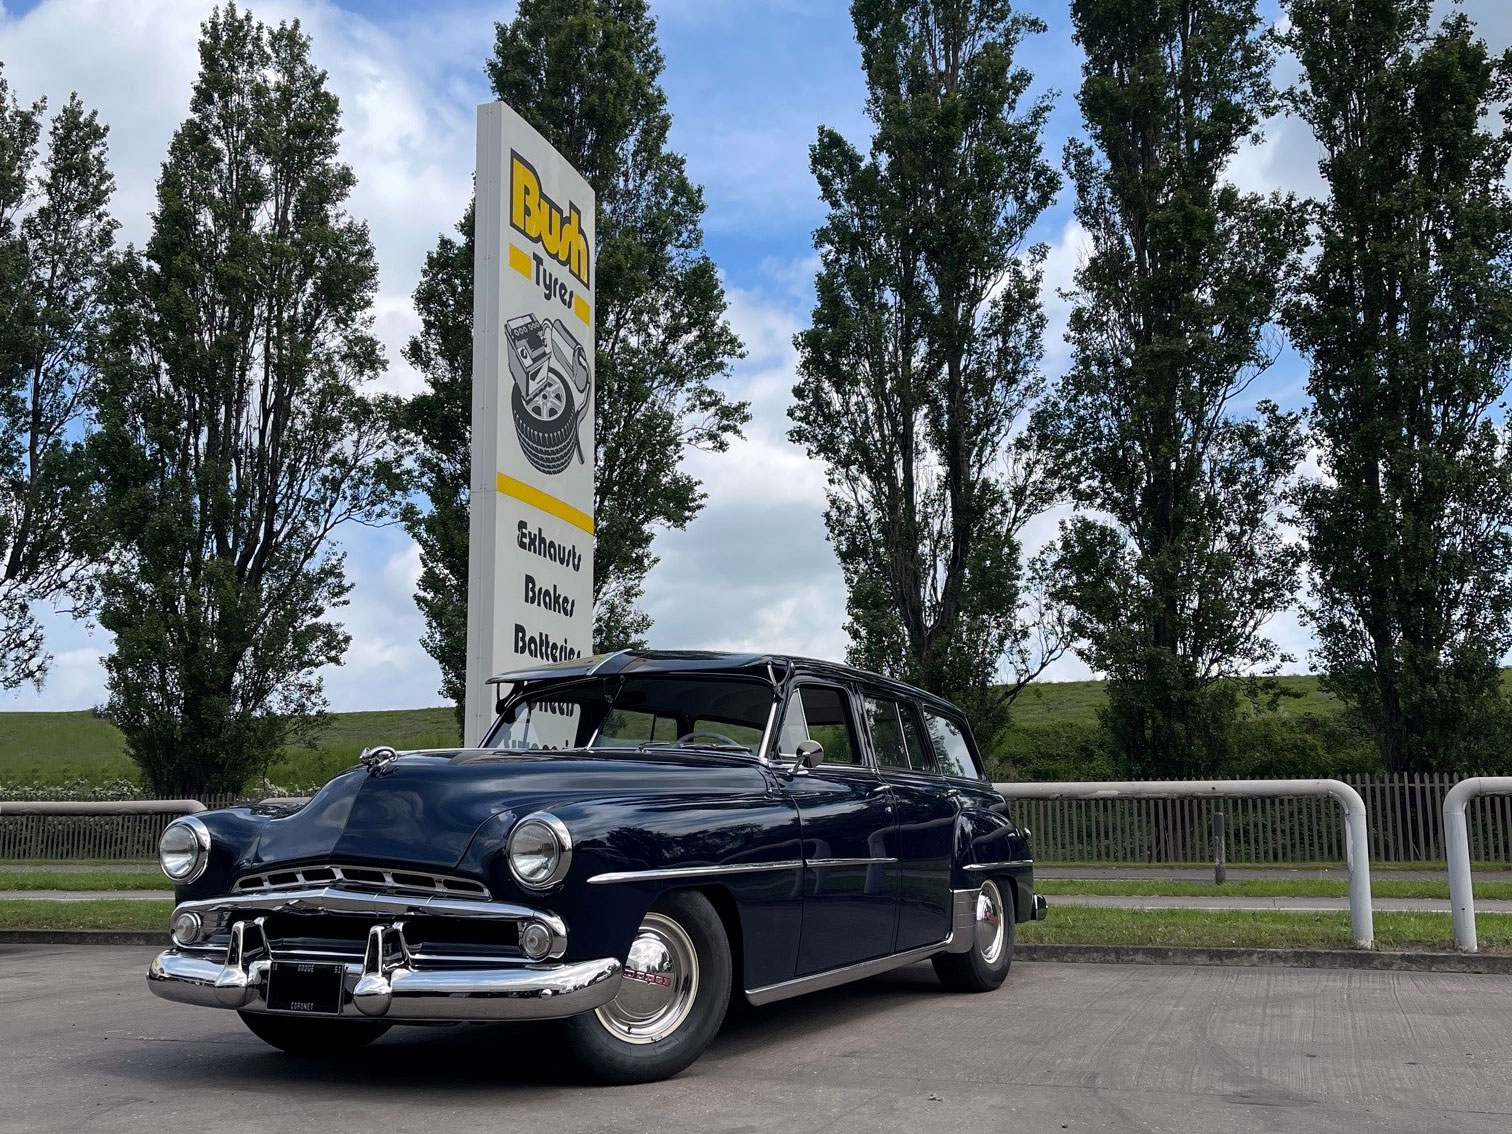 1952 Dodge Coronet visited us for a wheel alignment